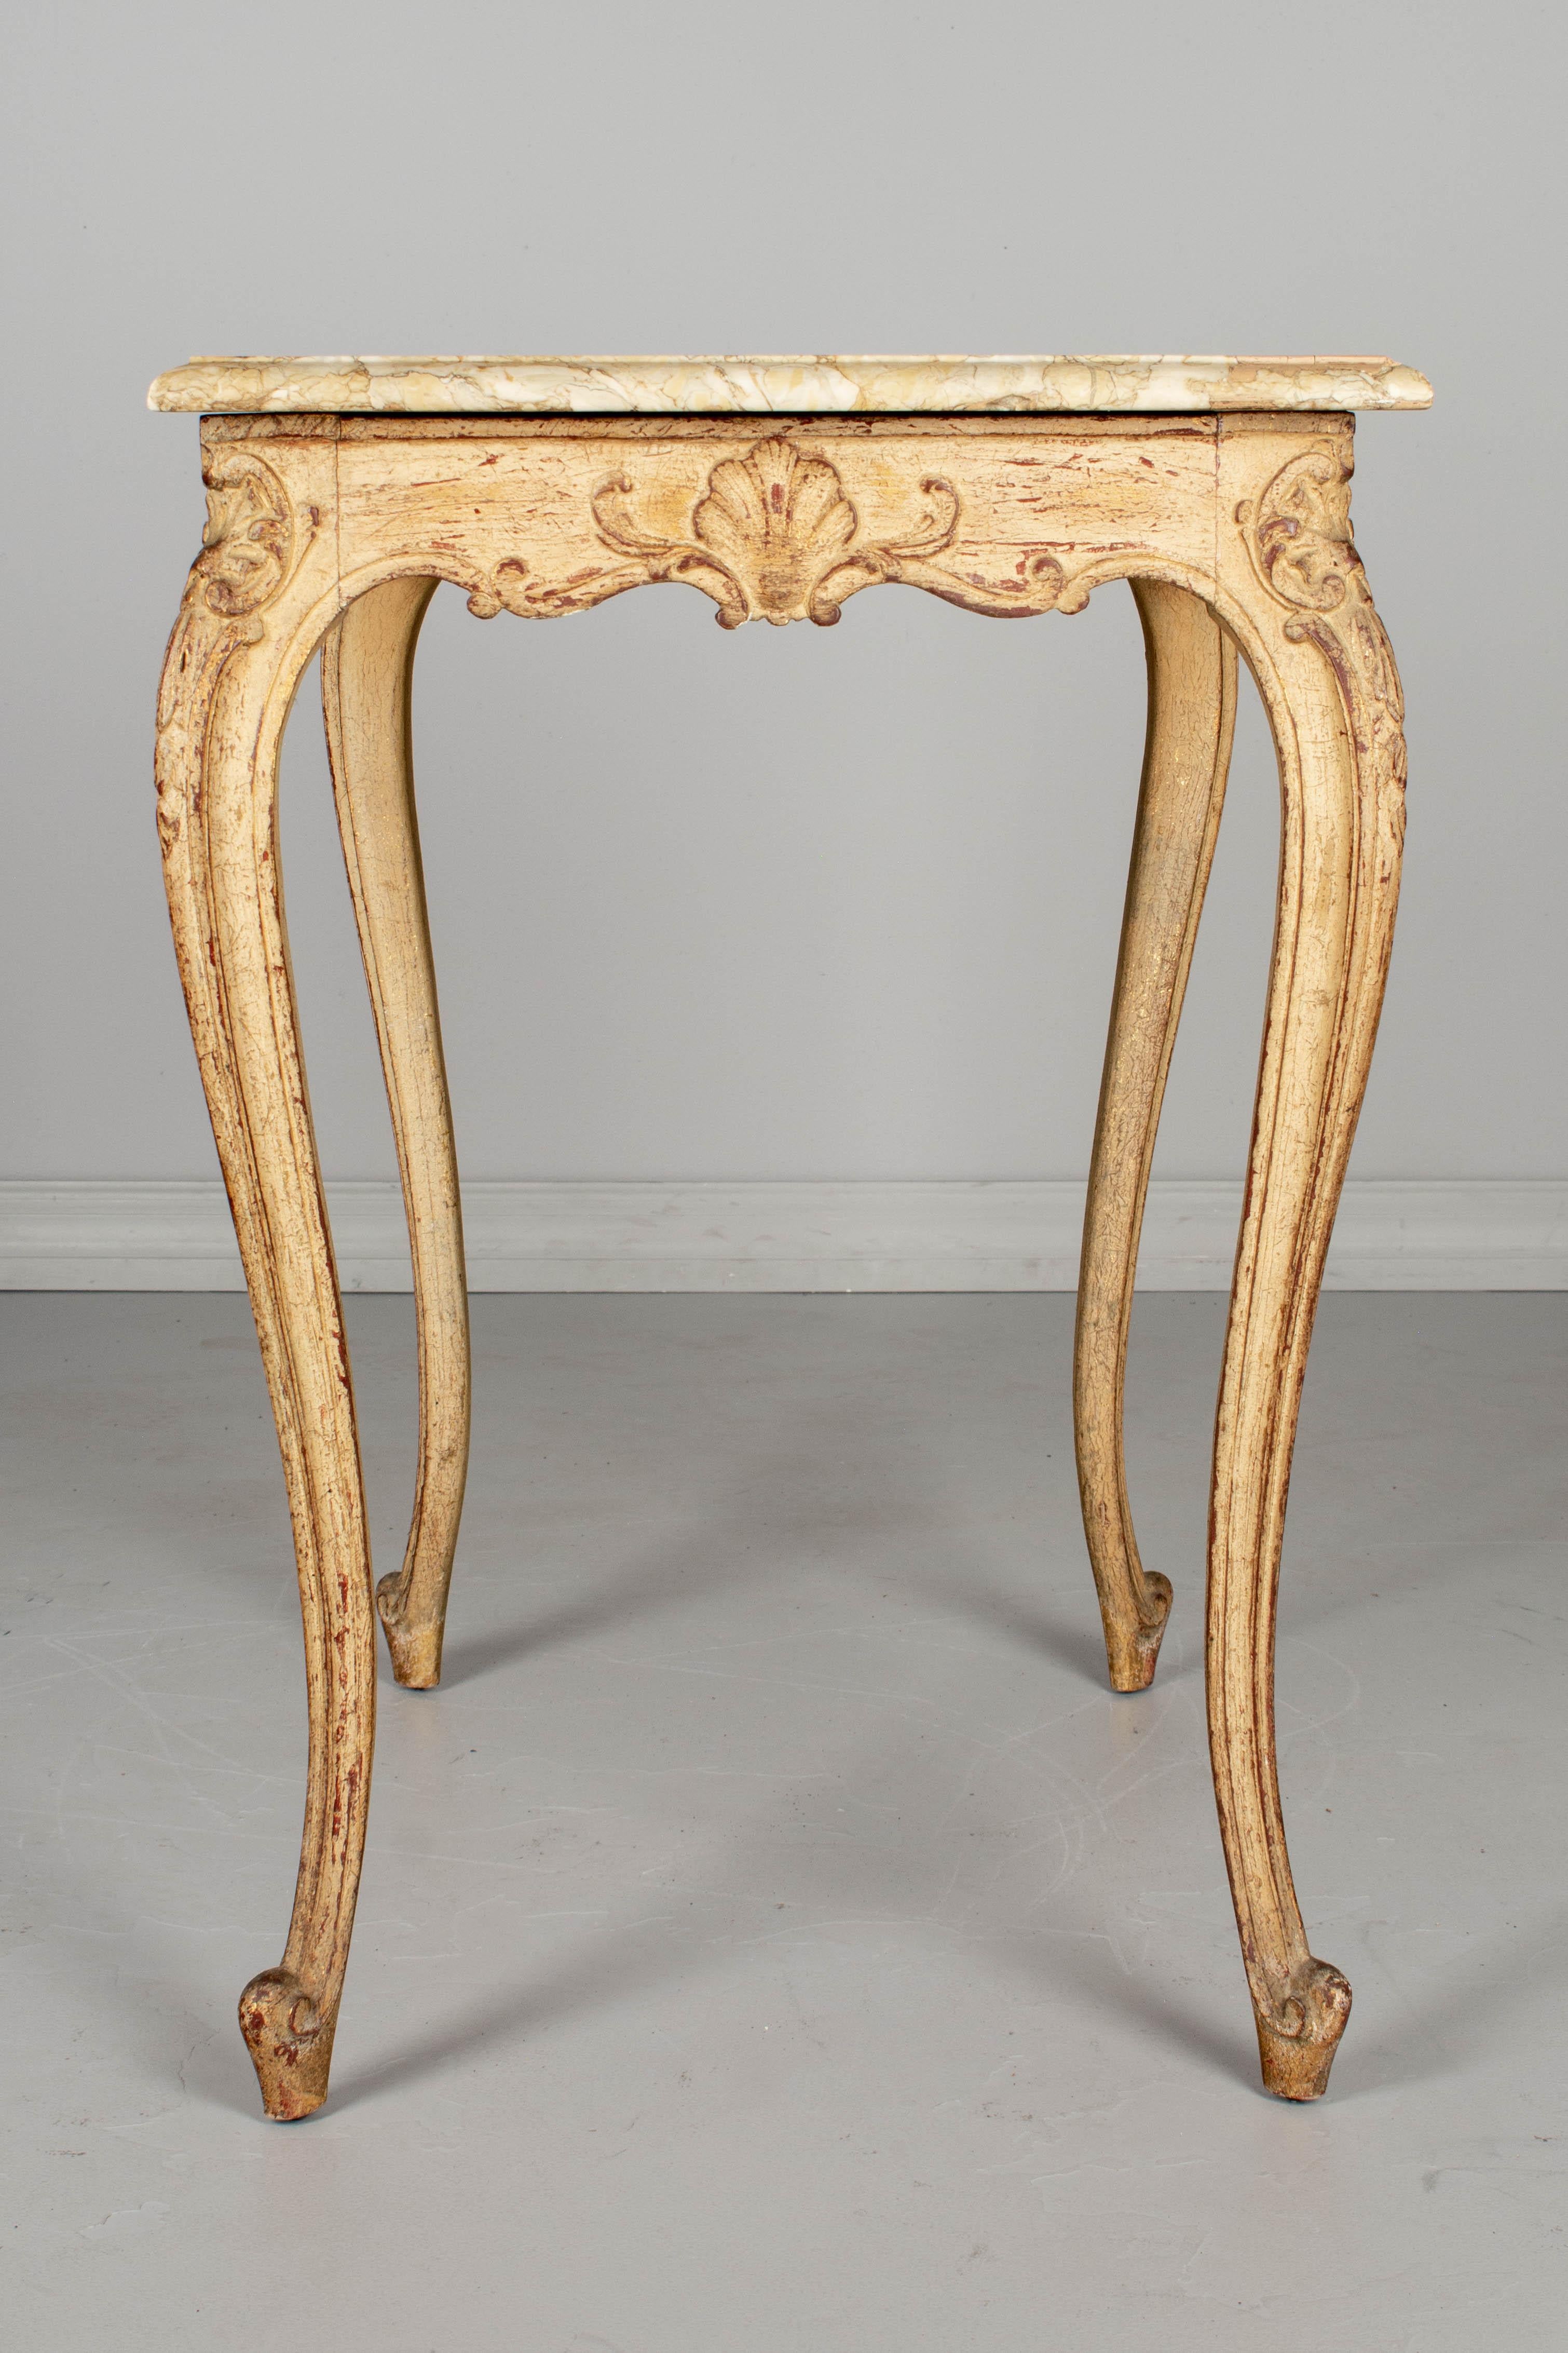 Early 20th c French Louis XV Style Marble-Top Table For Sale 3